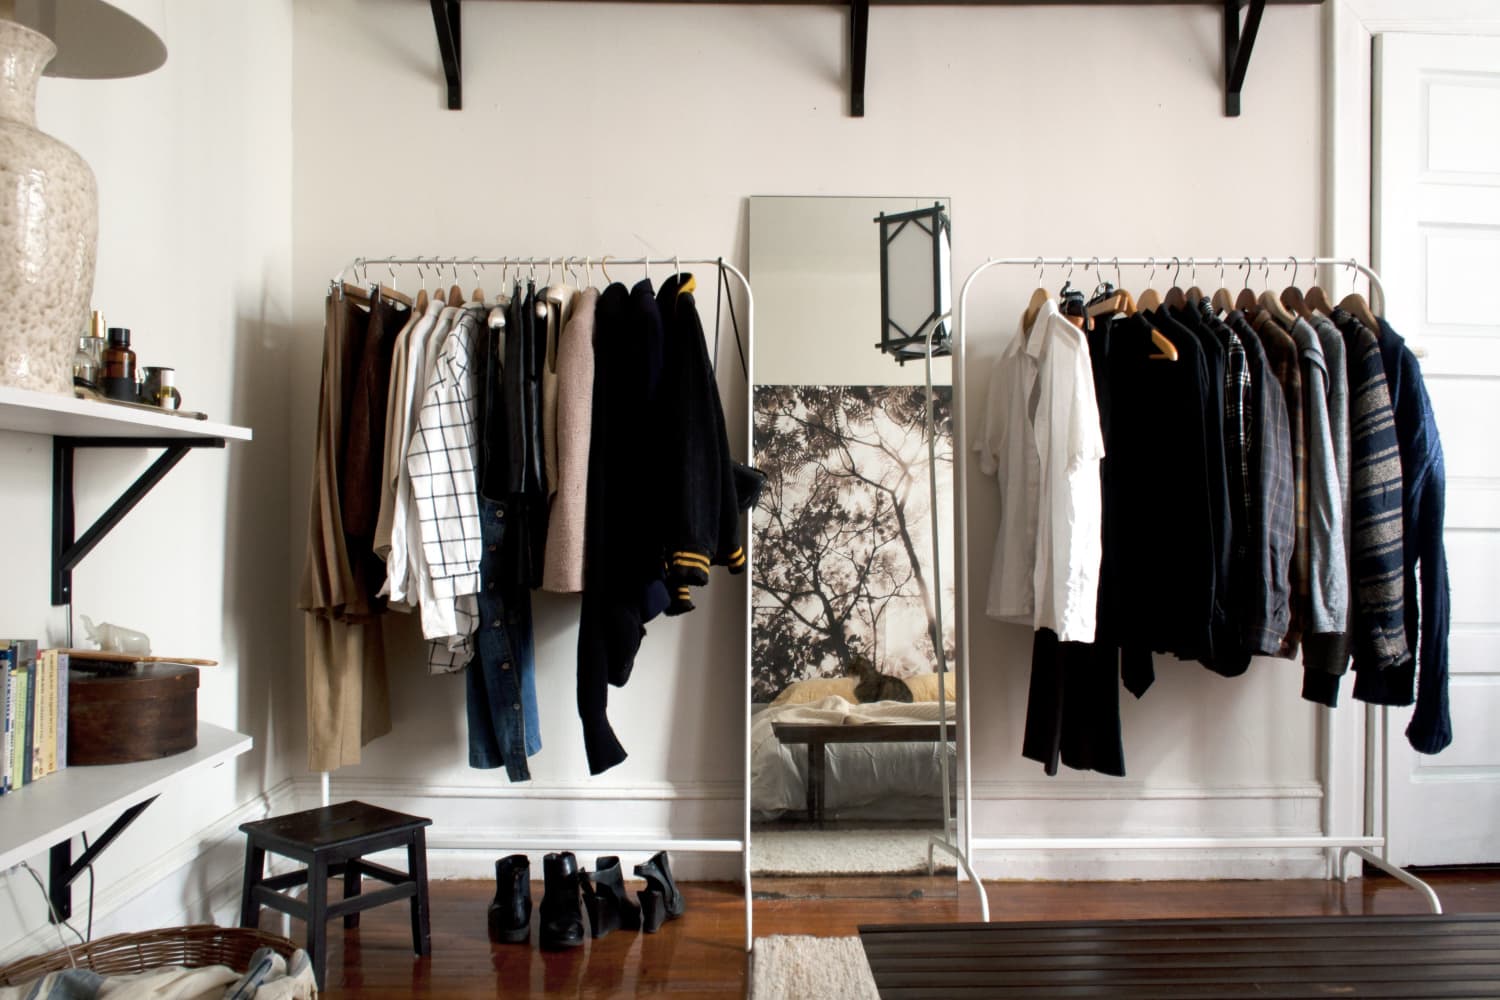 7 Items in Your Cleaning Closet Pros Say to Throw Out Right Now